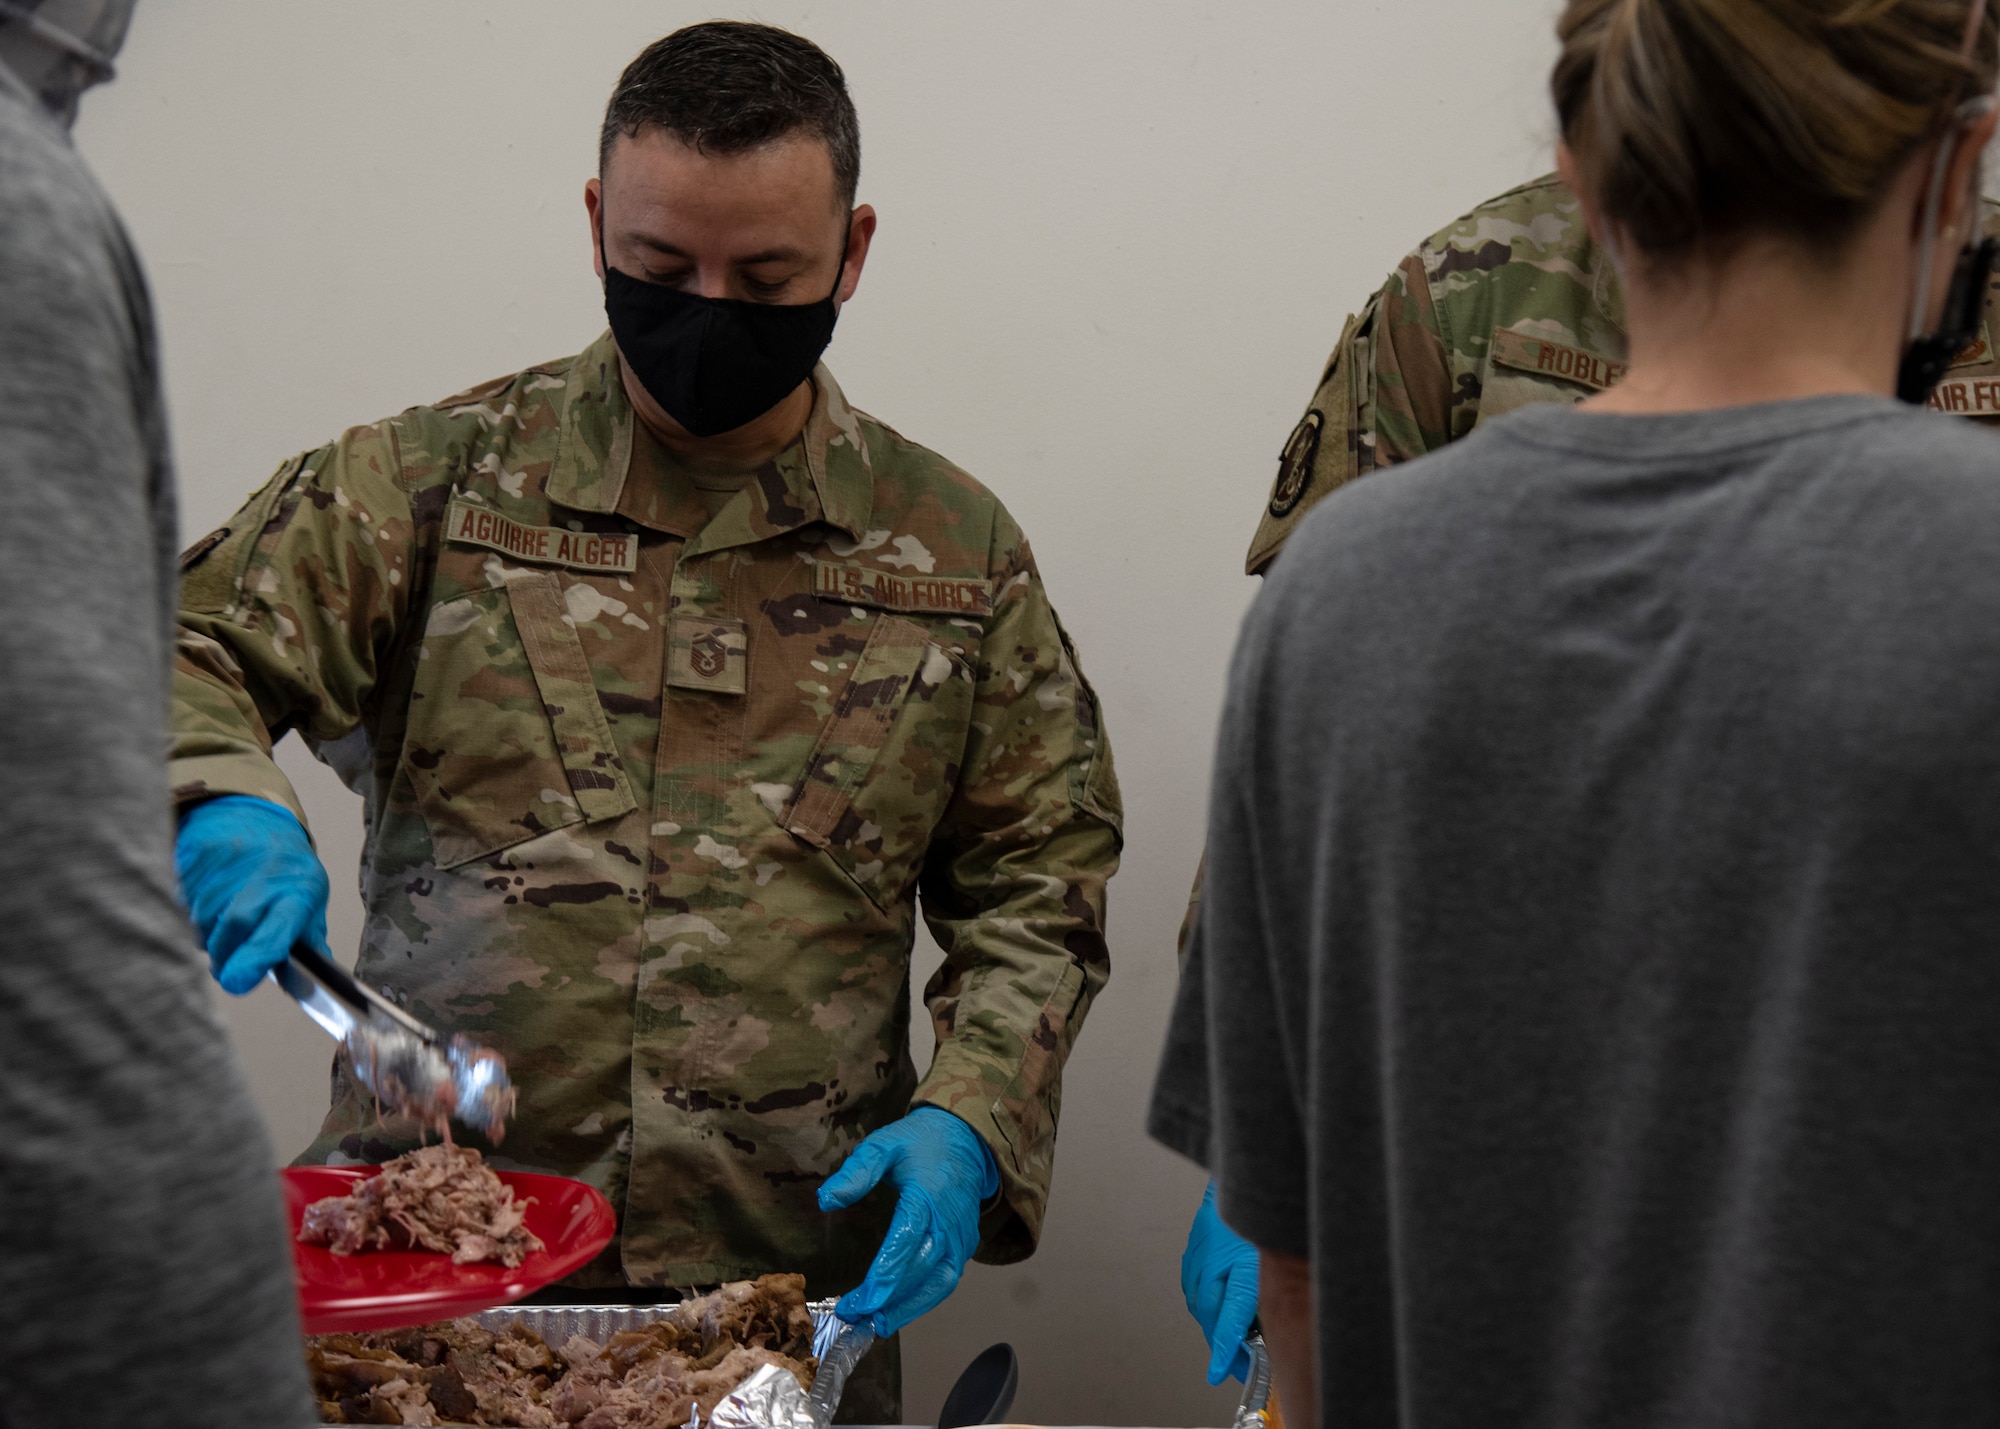 U.S. Air Force Senior Master Sgt. Juan Aguirre-Alger, 6th Force Support Squadron career assistance advisor, serves food during a Hispanic Heritage Month celebration at MacDill Air Force Base, Florida, Oct. 14, 2021.